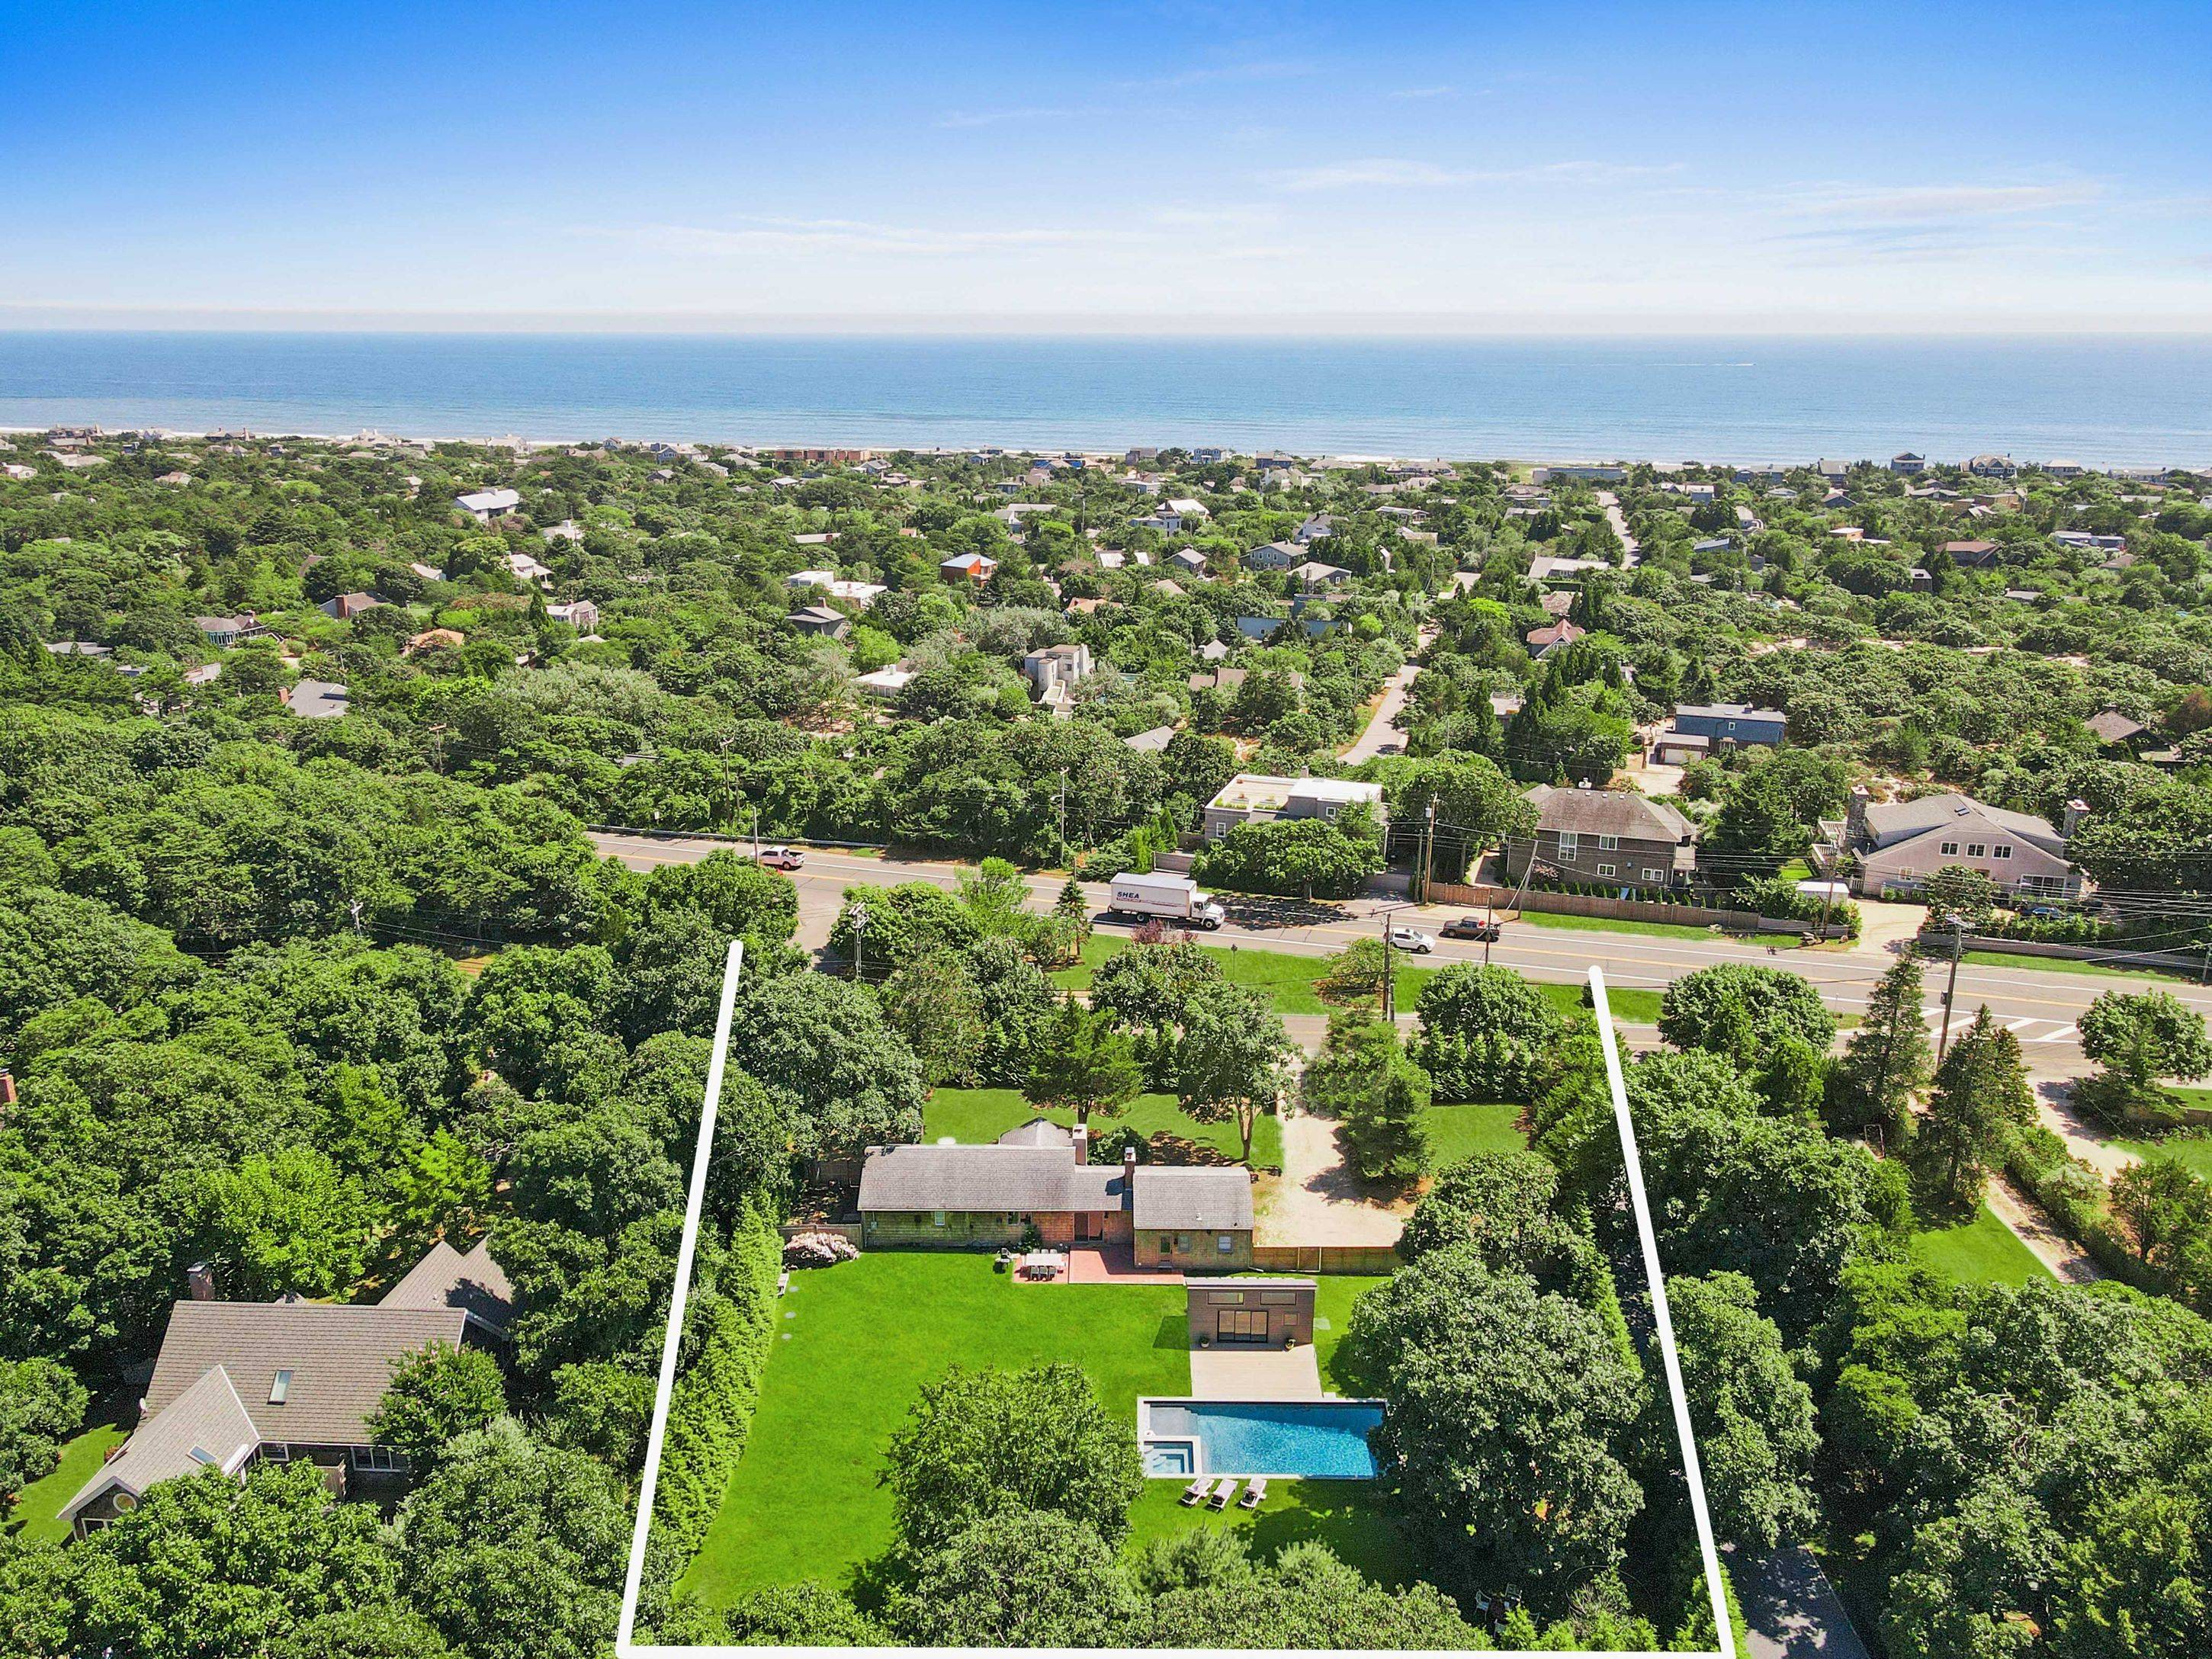 Newly Renovated Amagansett Summer Rental close to ocean and town